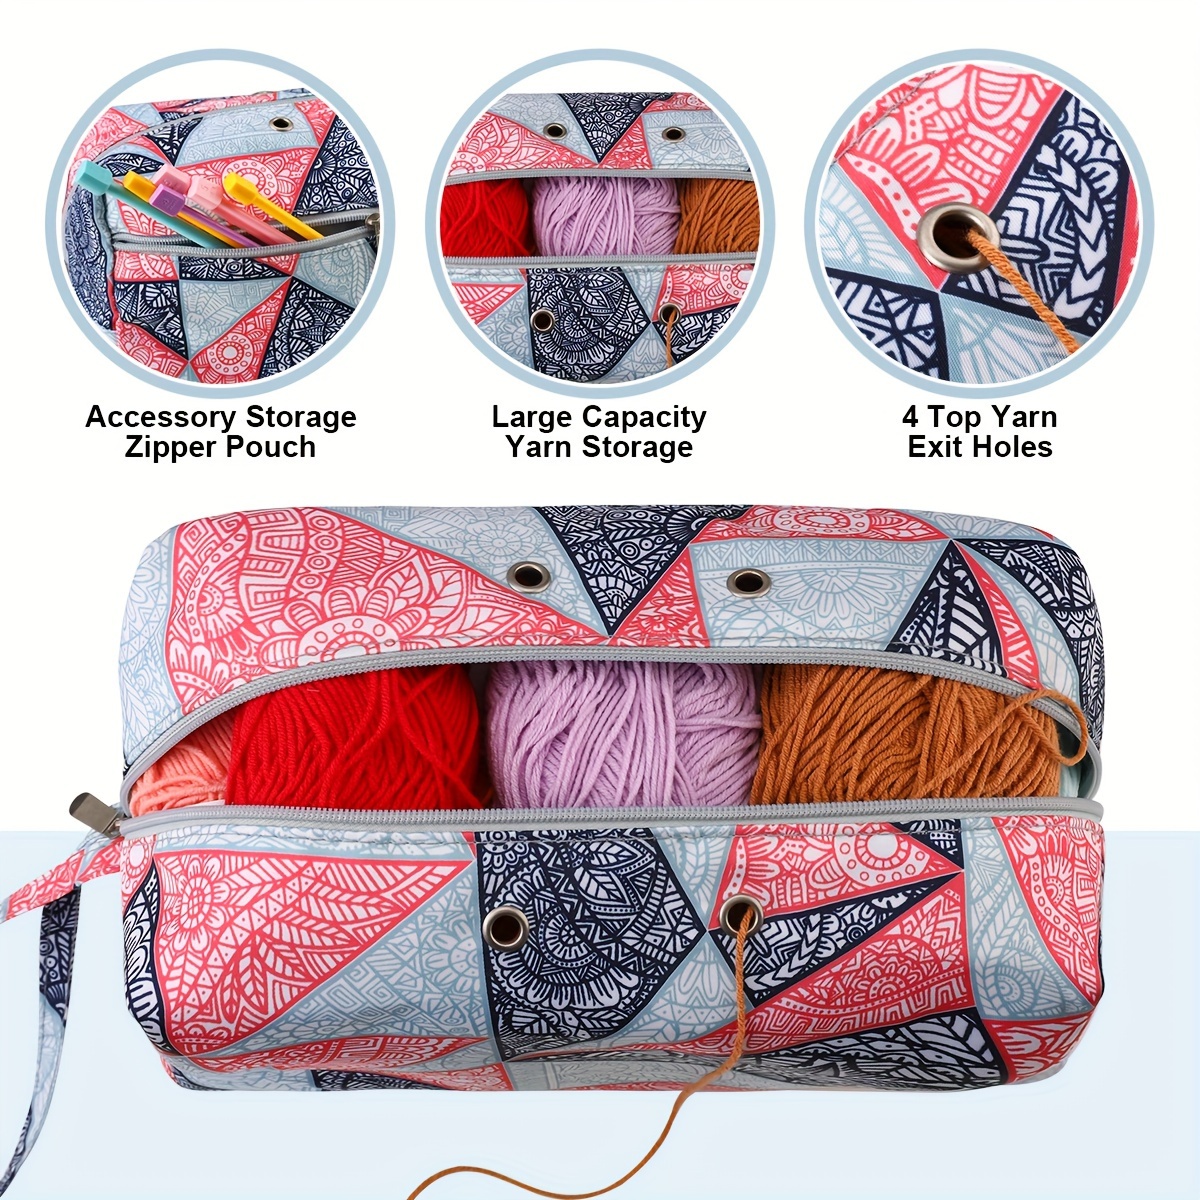 Knitting Bags and Accessories